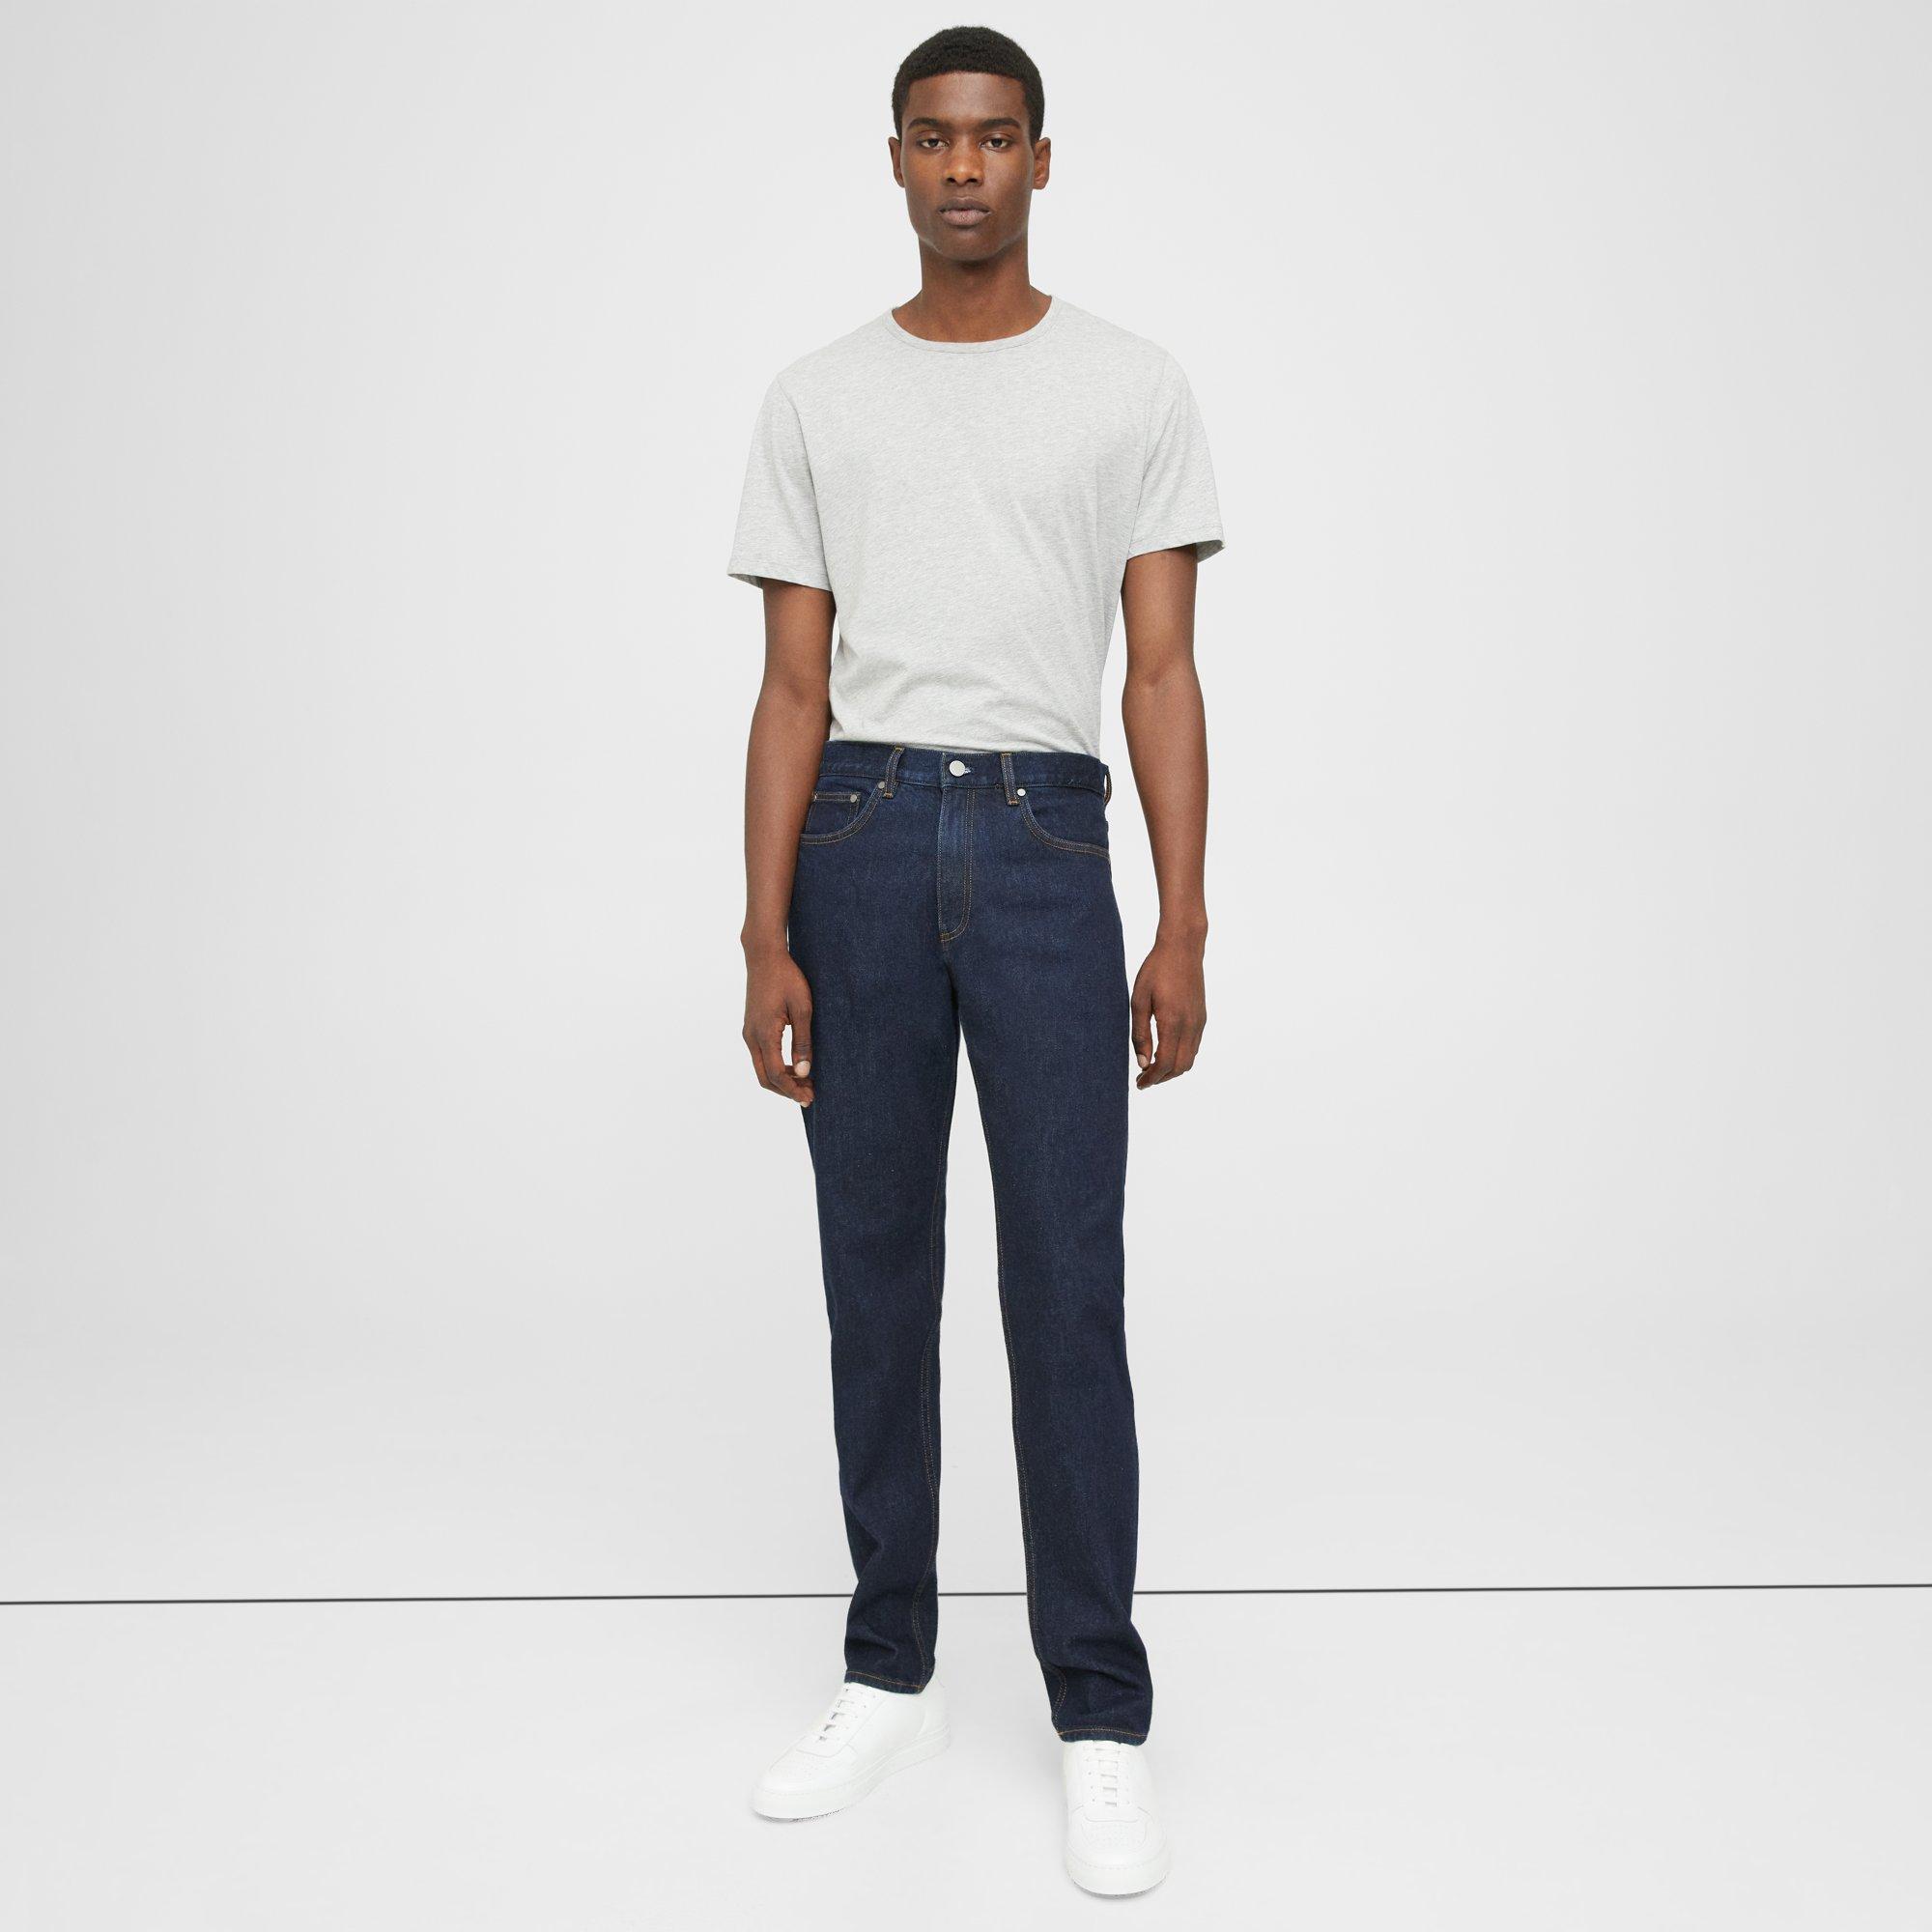 Theory Athletic Fit Jean in Stretch Denim  male Product Image